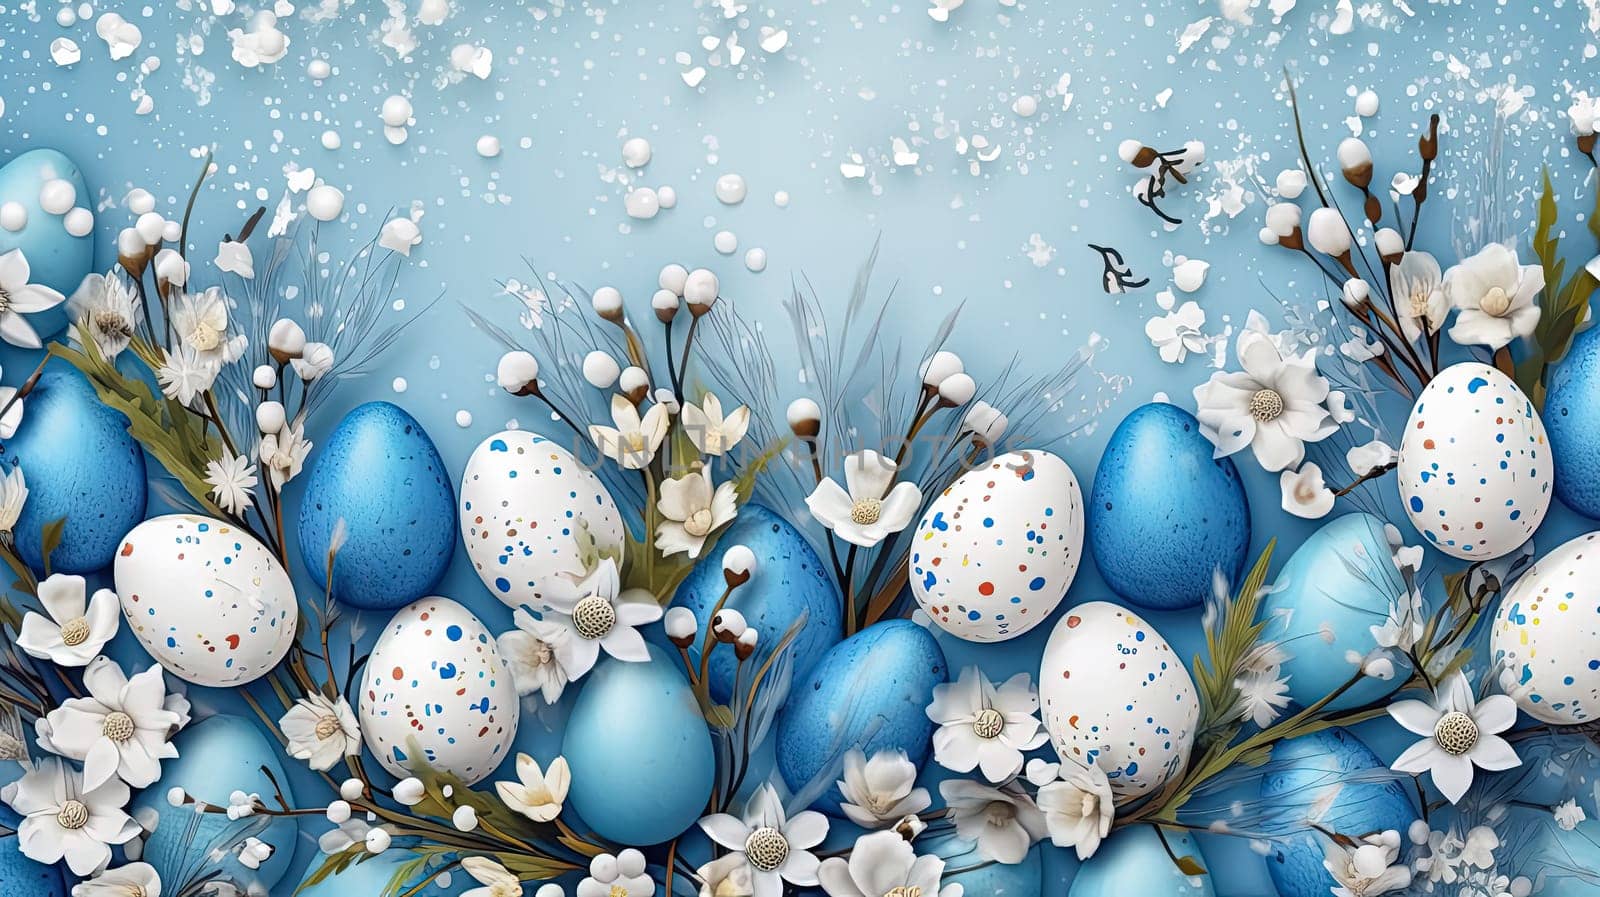 Easter bliss, Basket filled with eggs, radiating happiness a vibrant illustration embodying the spirit of celebration and the joyous arrival of spring